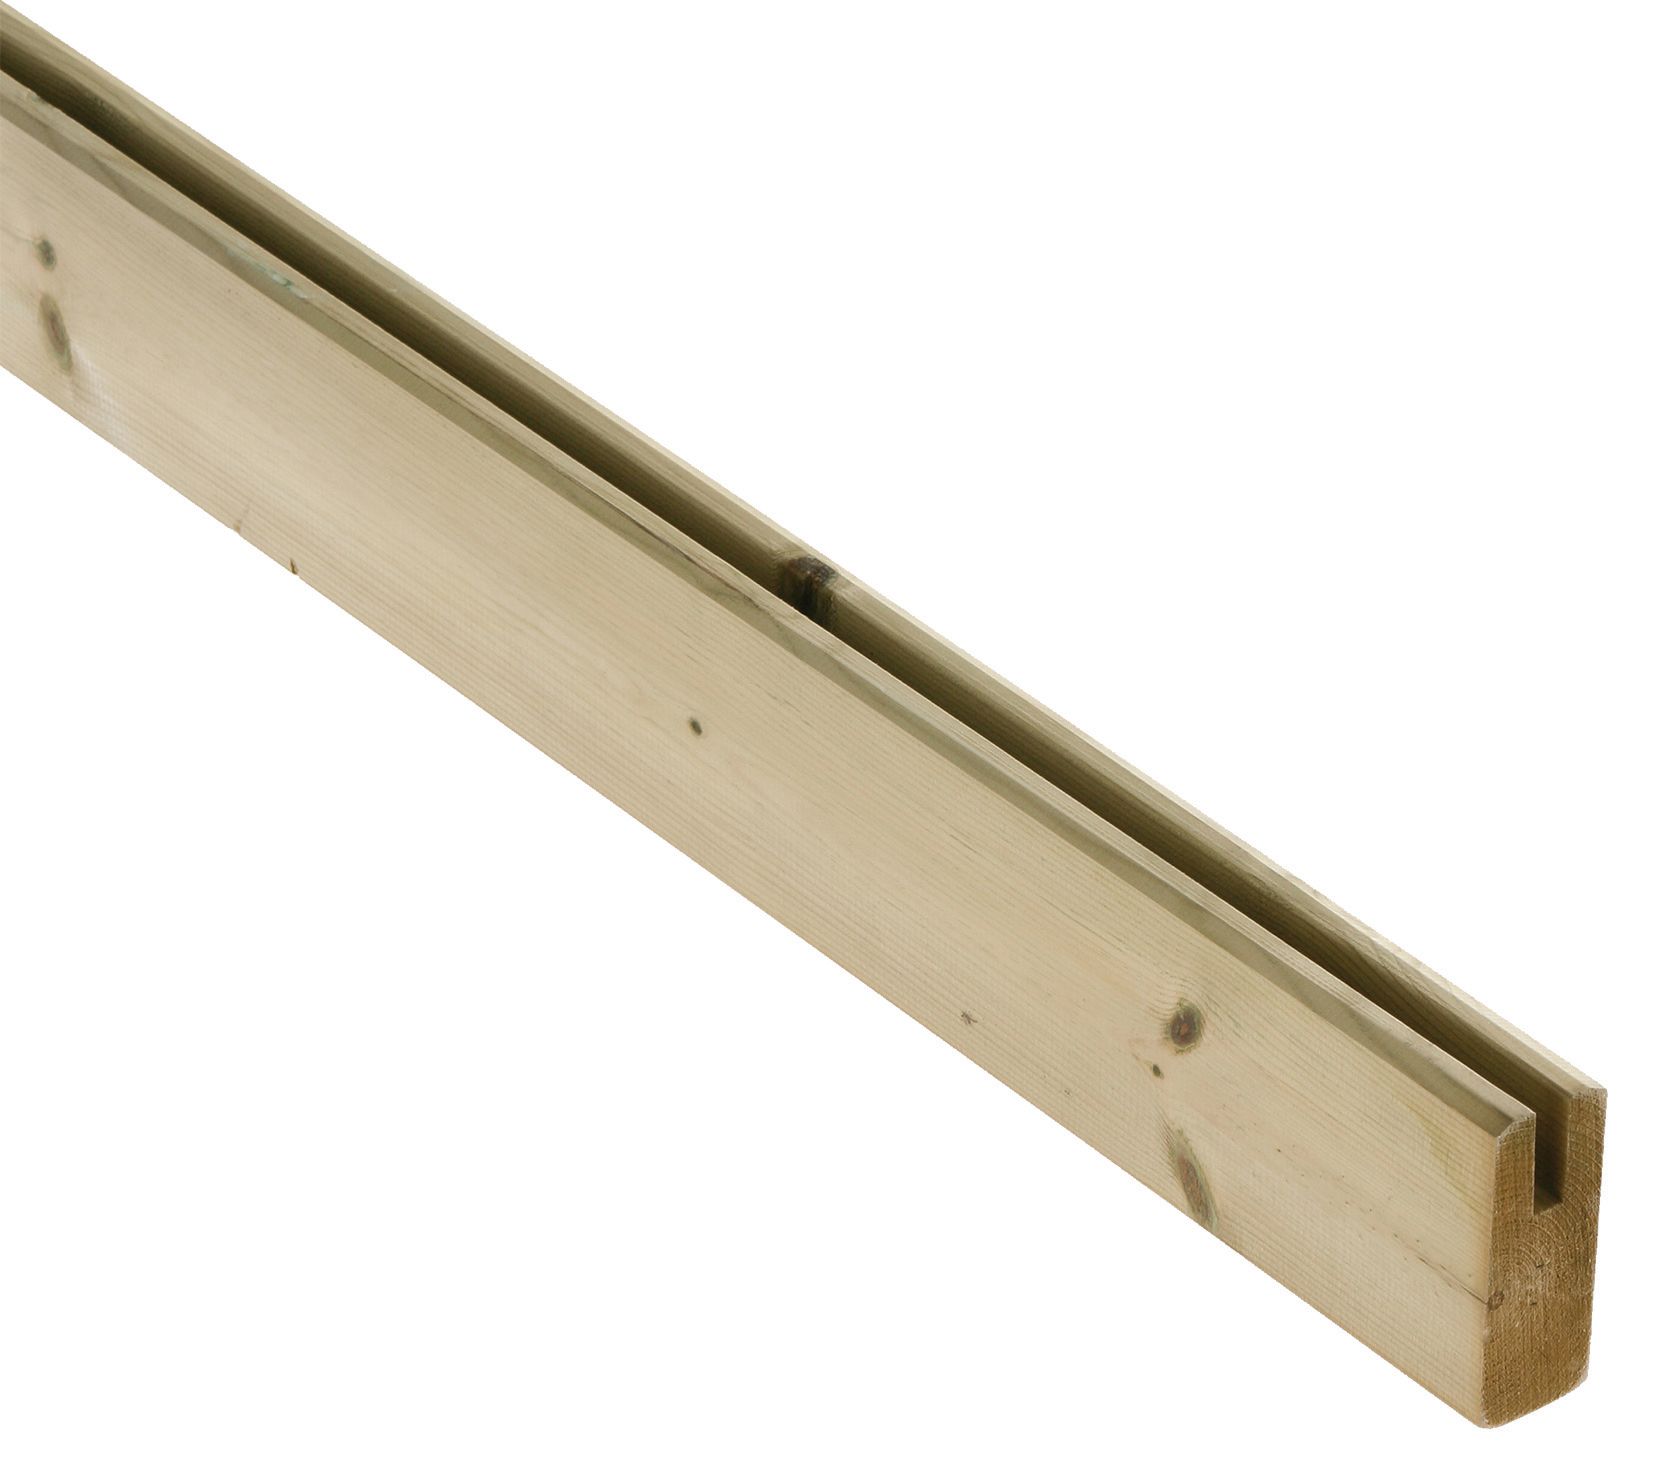 Wickes Slotted Deck Rail for Glass Balusters - 1800mm